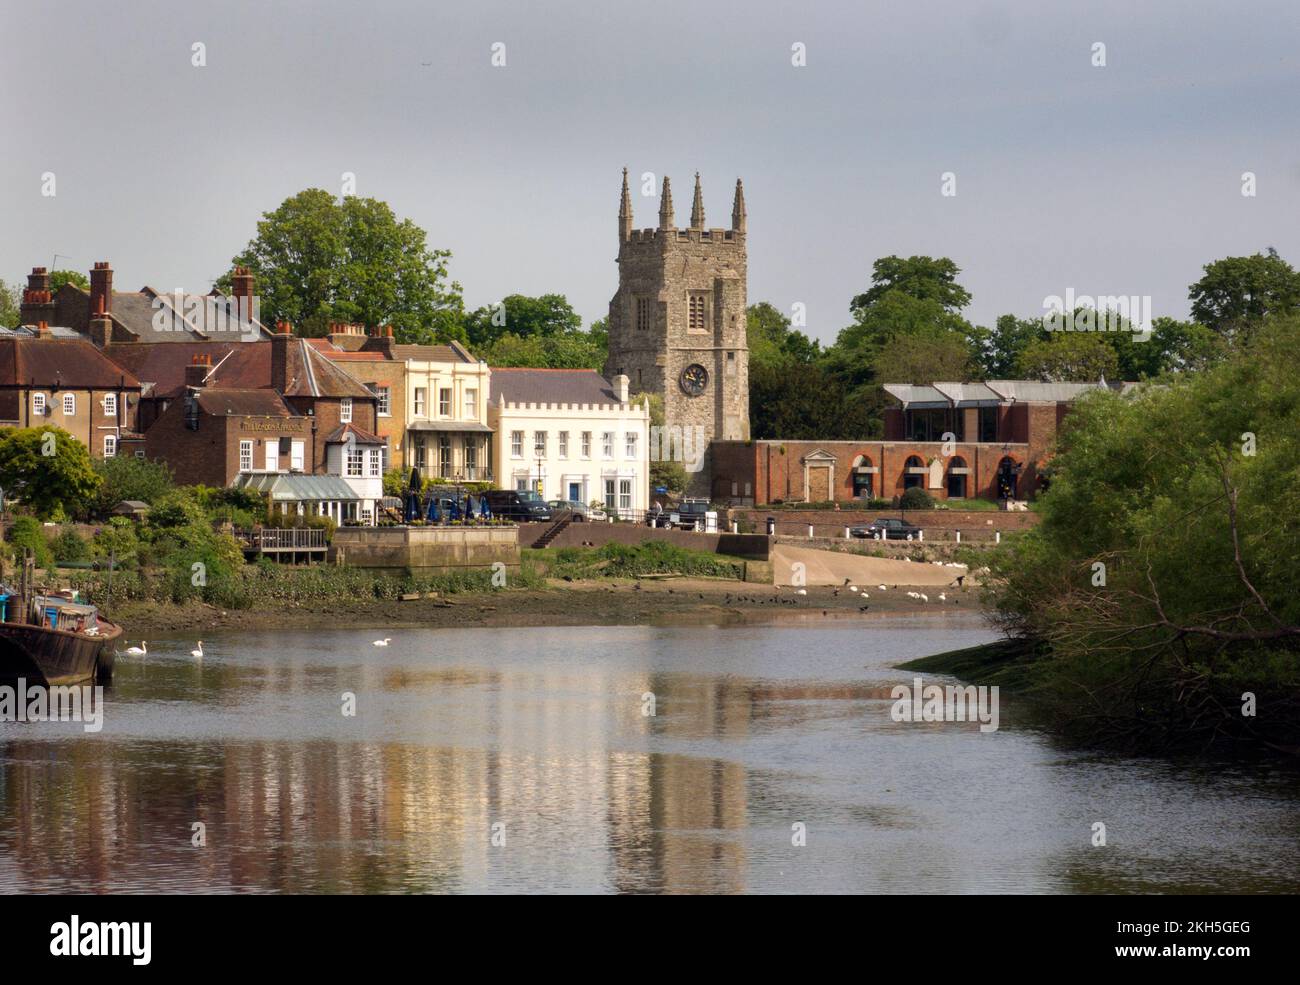 Old Isleworth and All Saints Church on the River Thames, Twickenham, Hounslow, Londres, Angleterre Banque D'Images